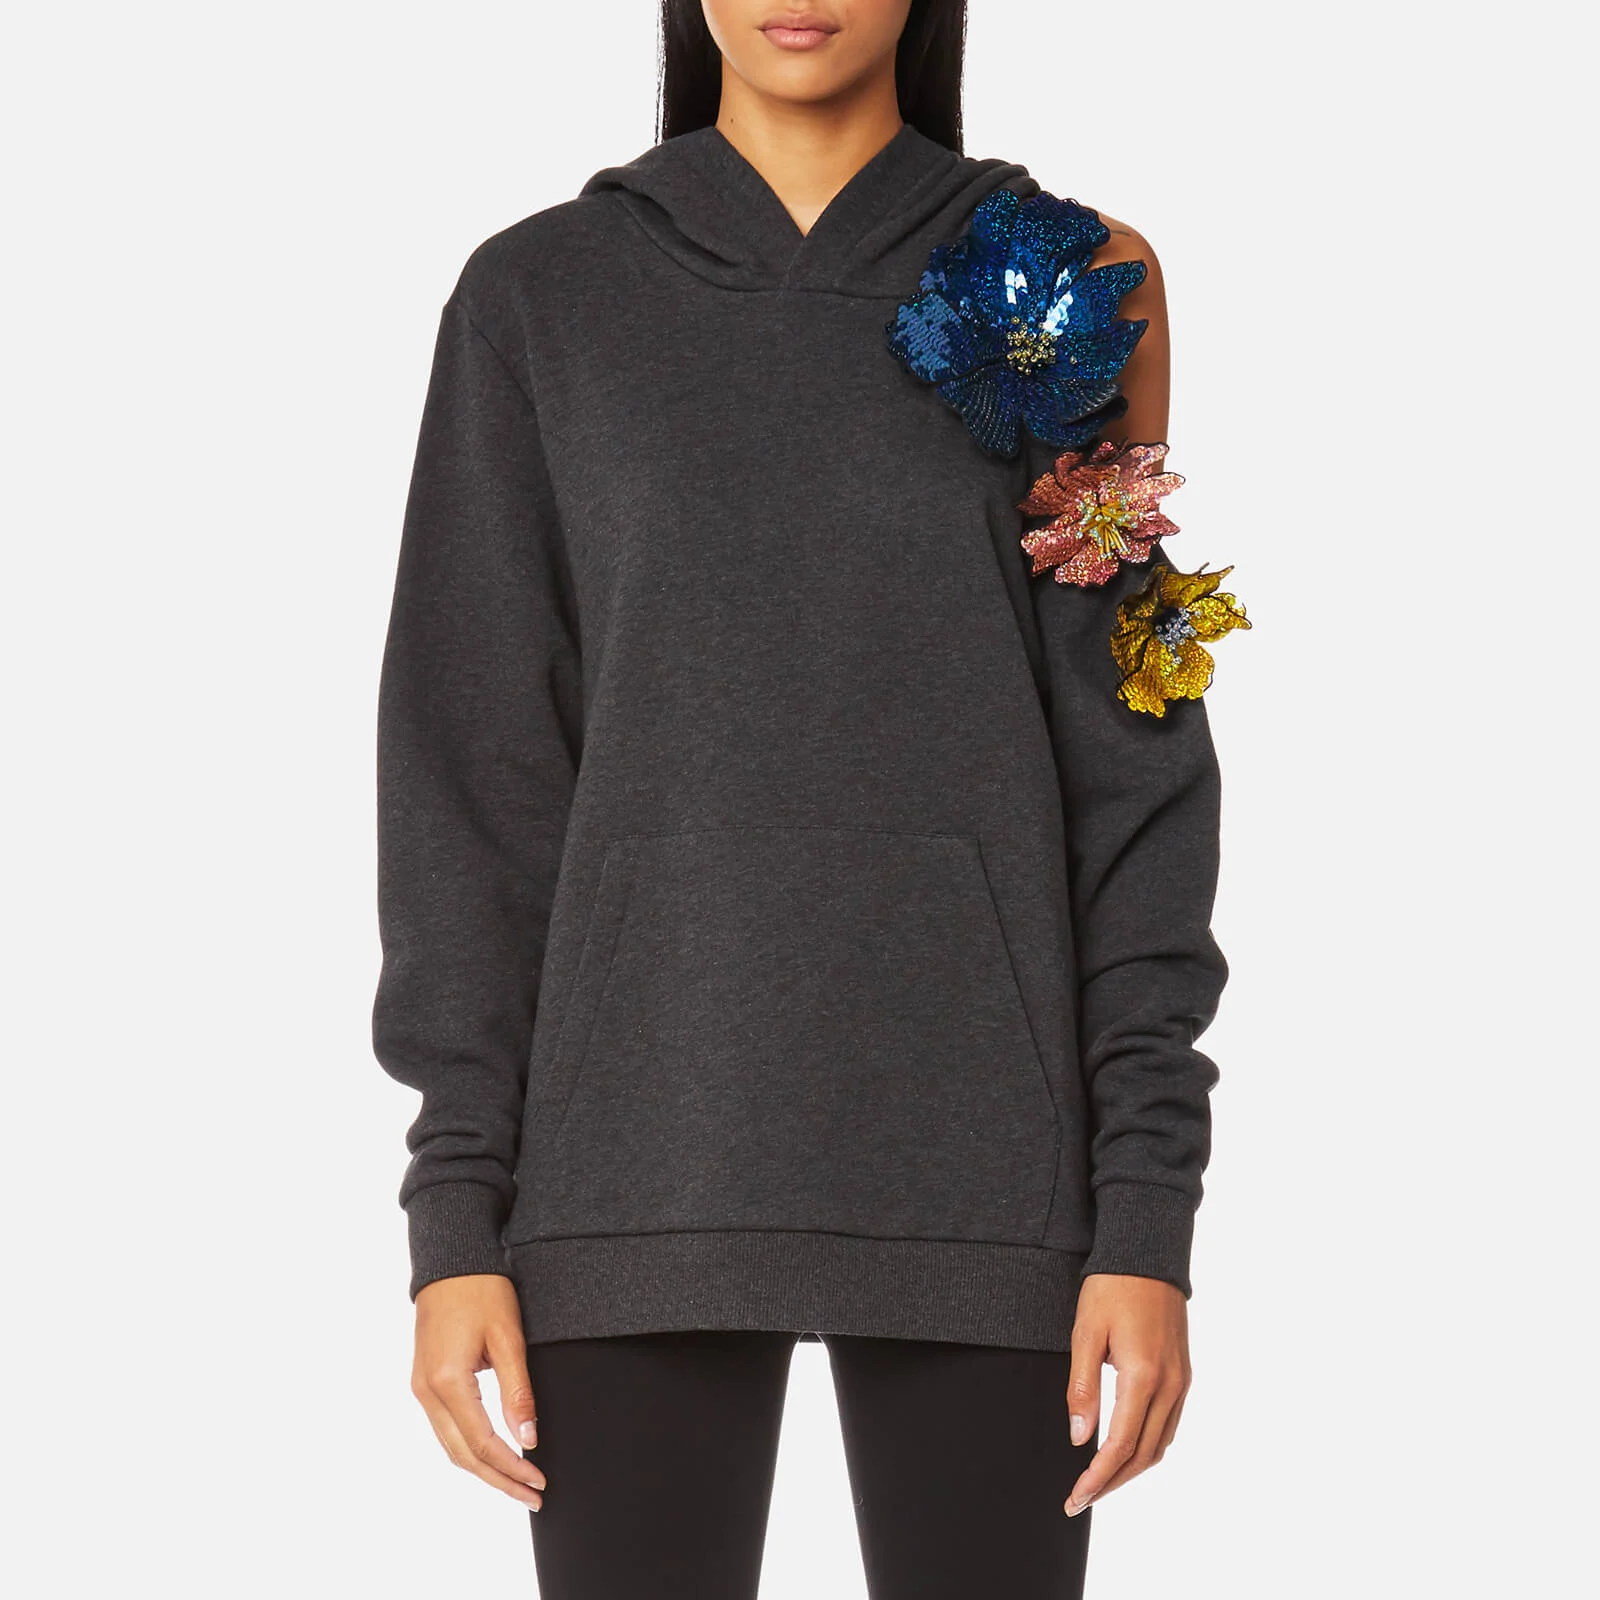 Christopher Kane Women's Cut Out Flower Hoody - Grey Image 1